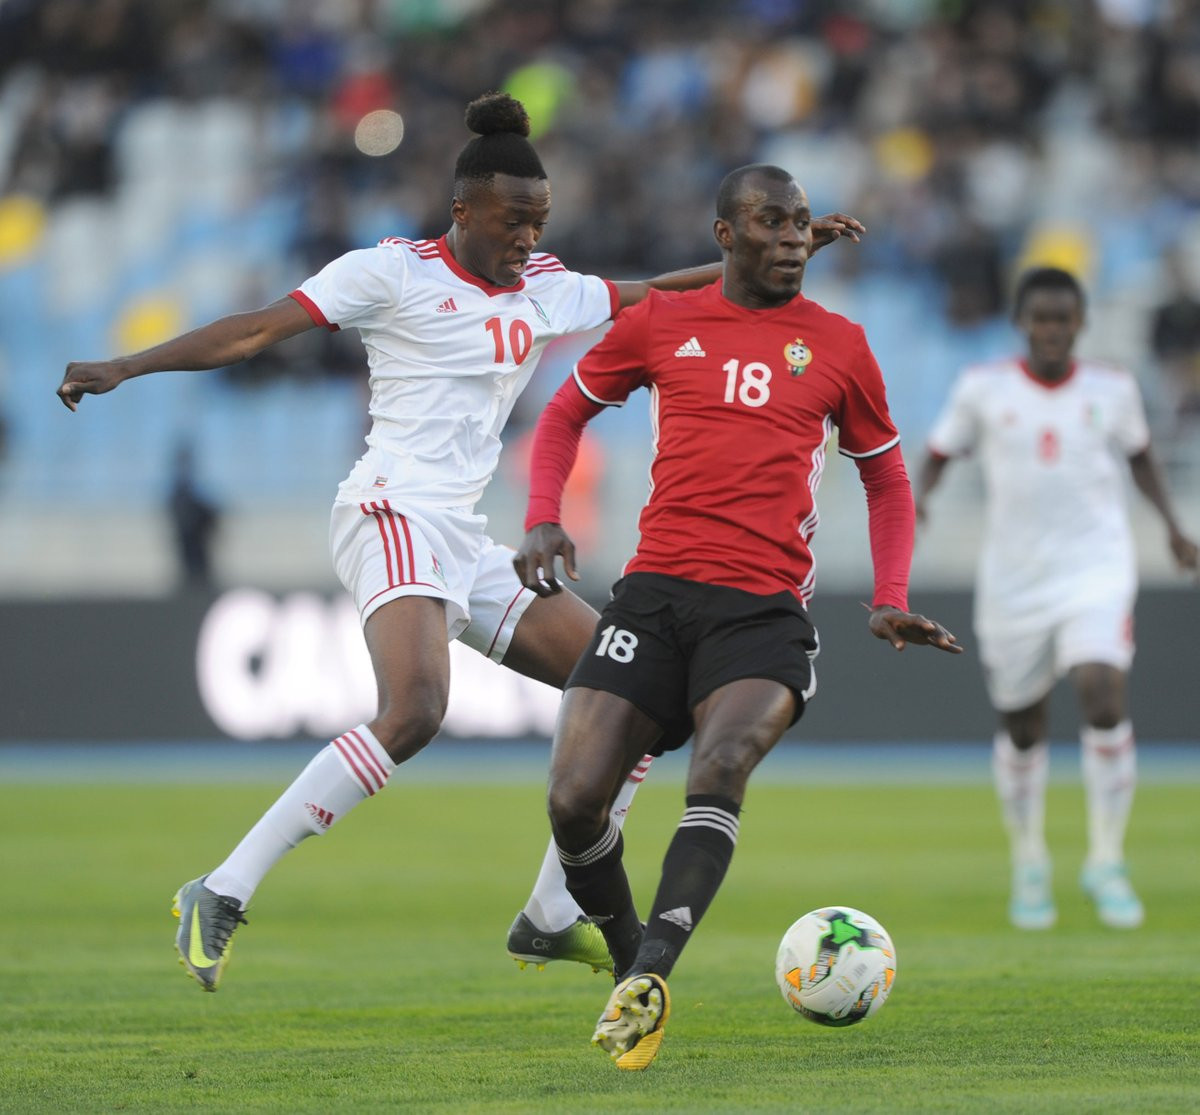 Libya swept aside Equatorial Guinea in their opening match in Tangier ©CAF